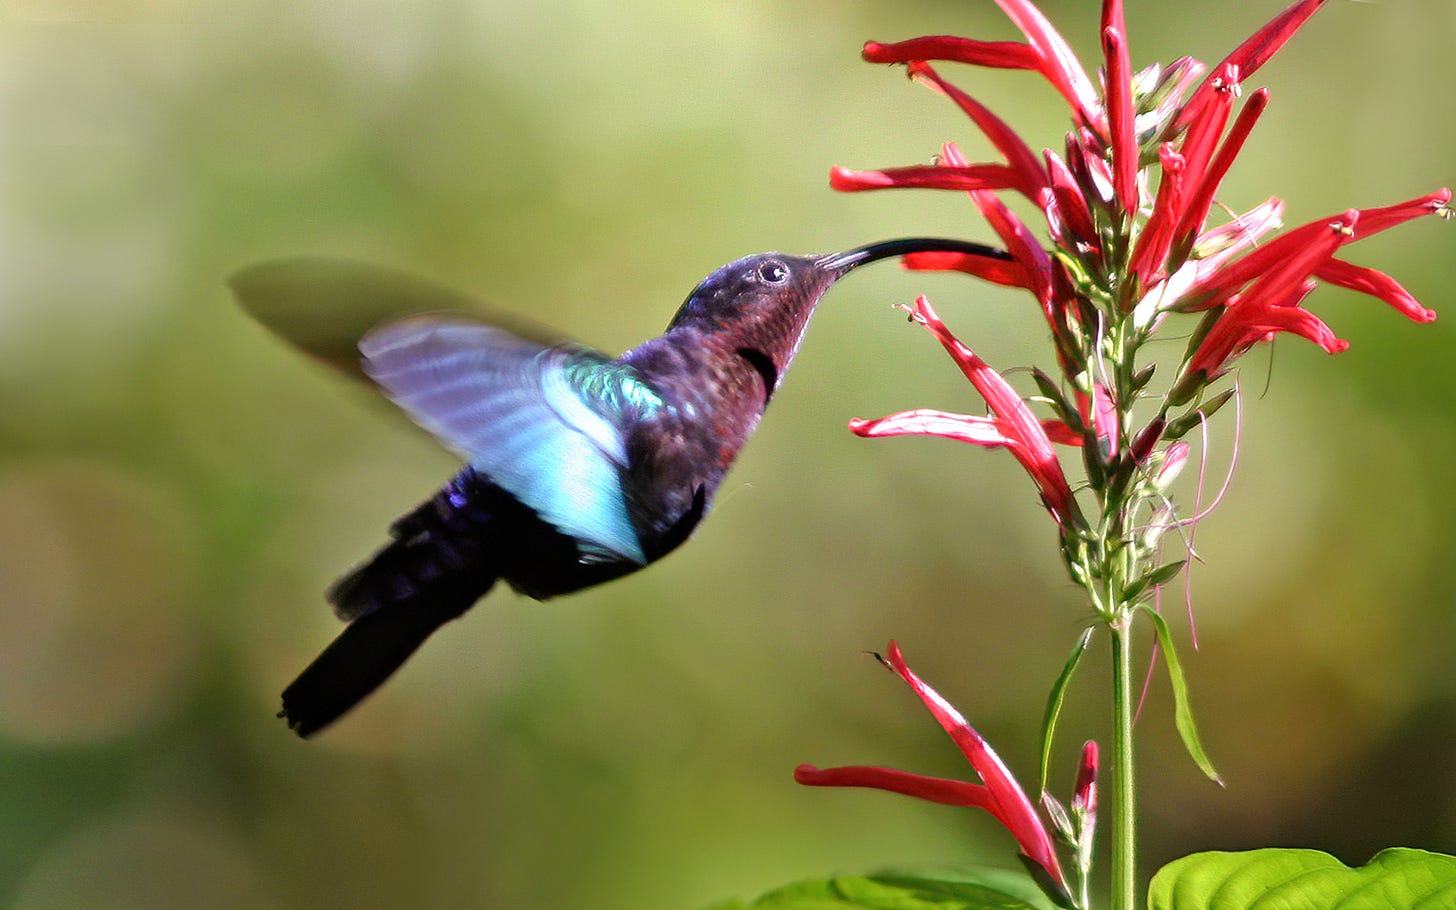 A hummingbird, its wings outstretched and shimmering with iridescent colors, hovers before a vibrant red flower, its long beak poised to sip nectar. The scene evokes the beauty and vitality of nature, encouraging the viewer to pause, observe, and appreciate the intricate patterns and interconnectedness of the world around us.